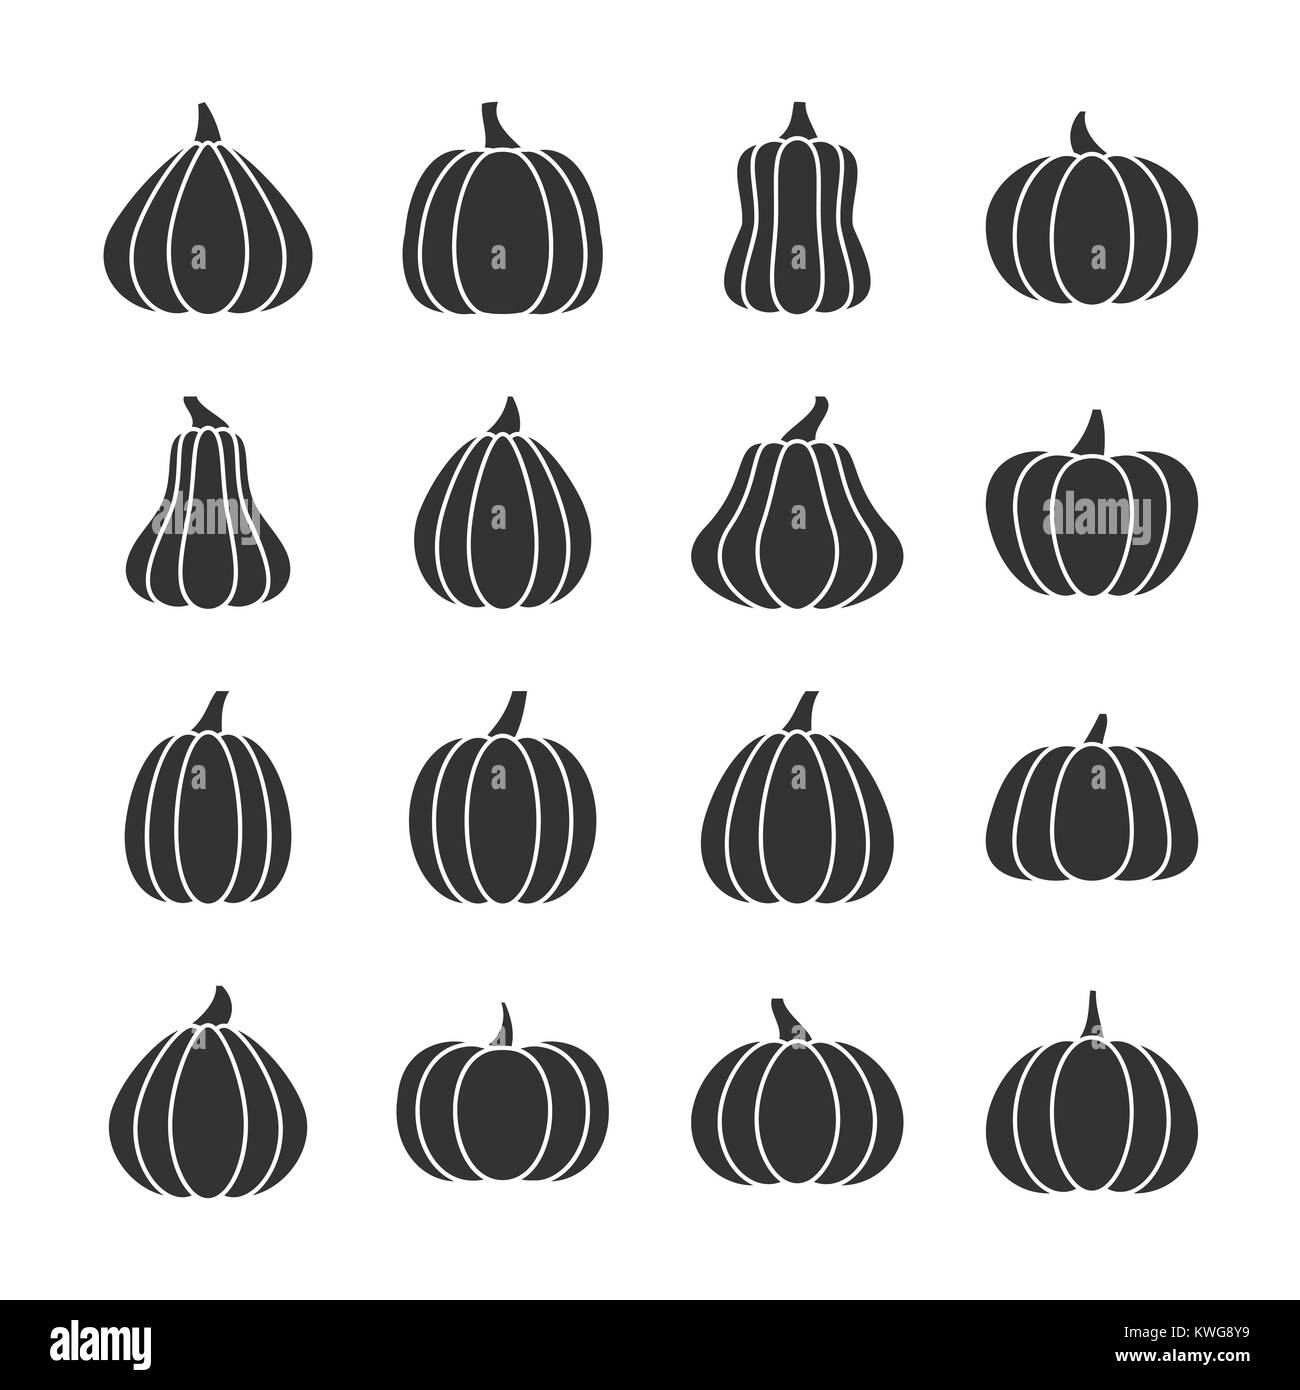 Pumpkin black filled silhouette icon set. Thanksgiving monochrome symbol flat design collection. Gourd simple graphic pictogram pack Squash isolated w Stock Vector